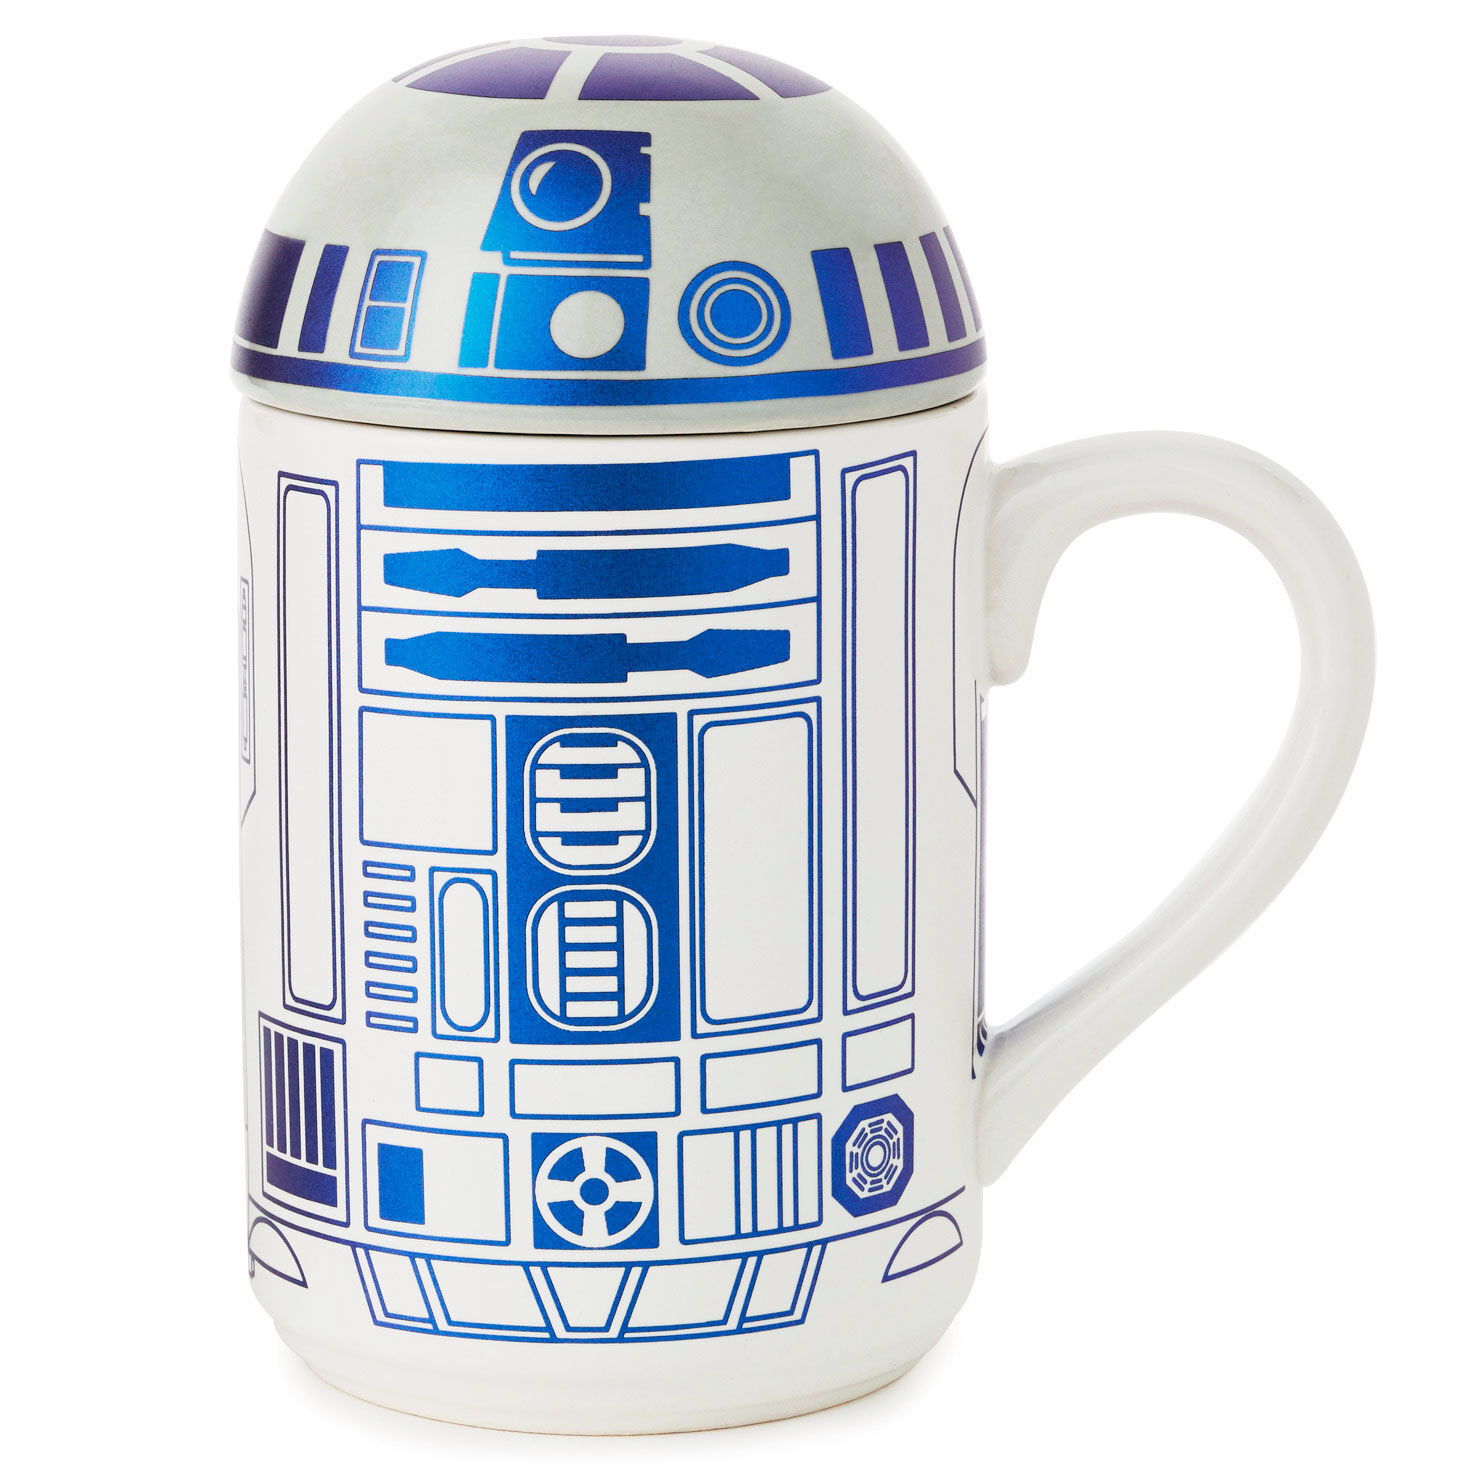 NEW R2D2 BOXED MUG GIFT CERAMIC COFFEE CUP STAR WARS DROID ROBOT Mens Geek Gift 